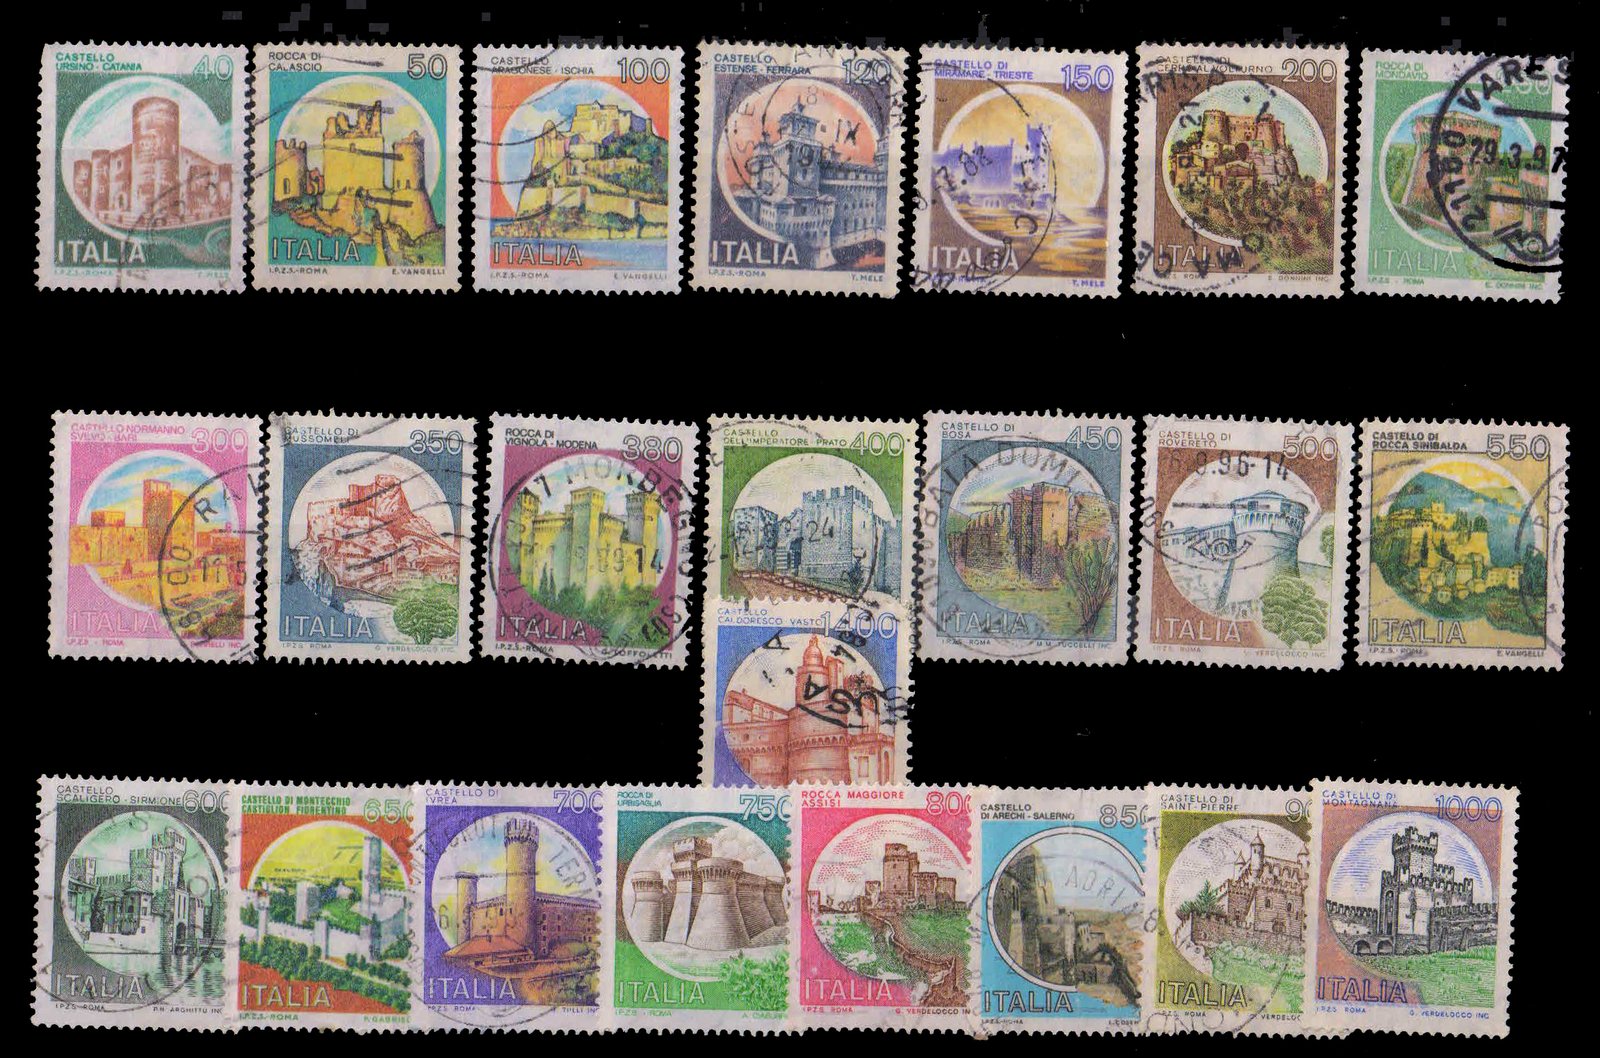 ITALY 1980-Castles, Buildings, Set of 23 Stamps, S.G. 1649-1678